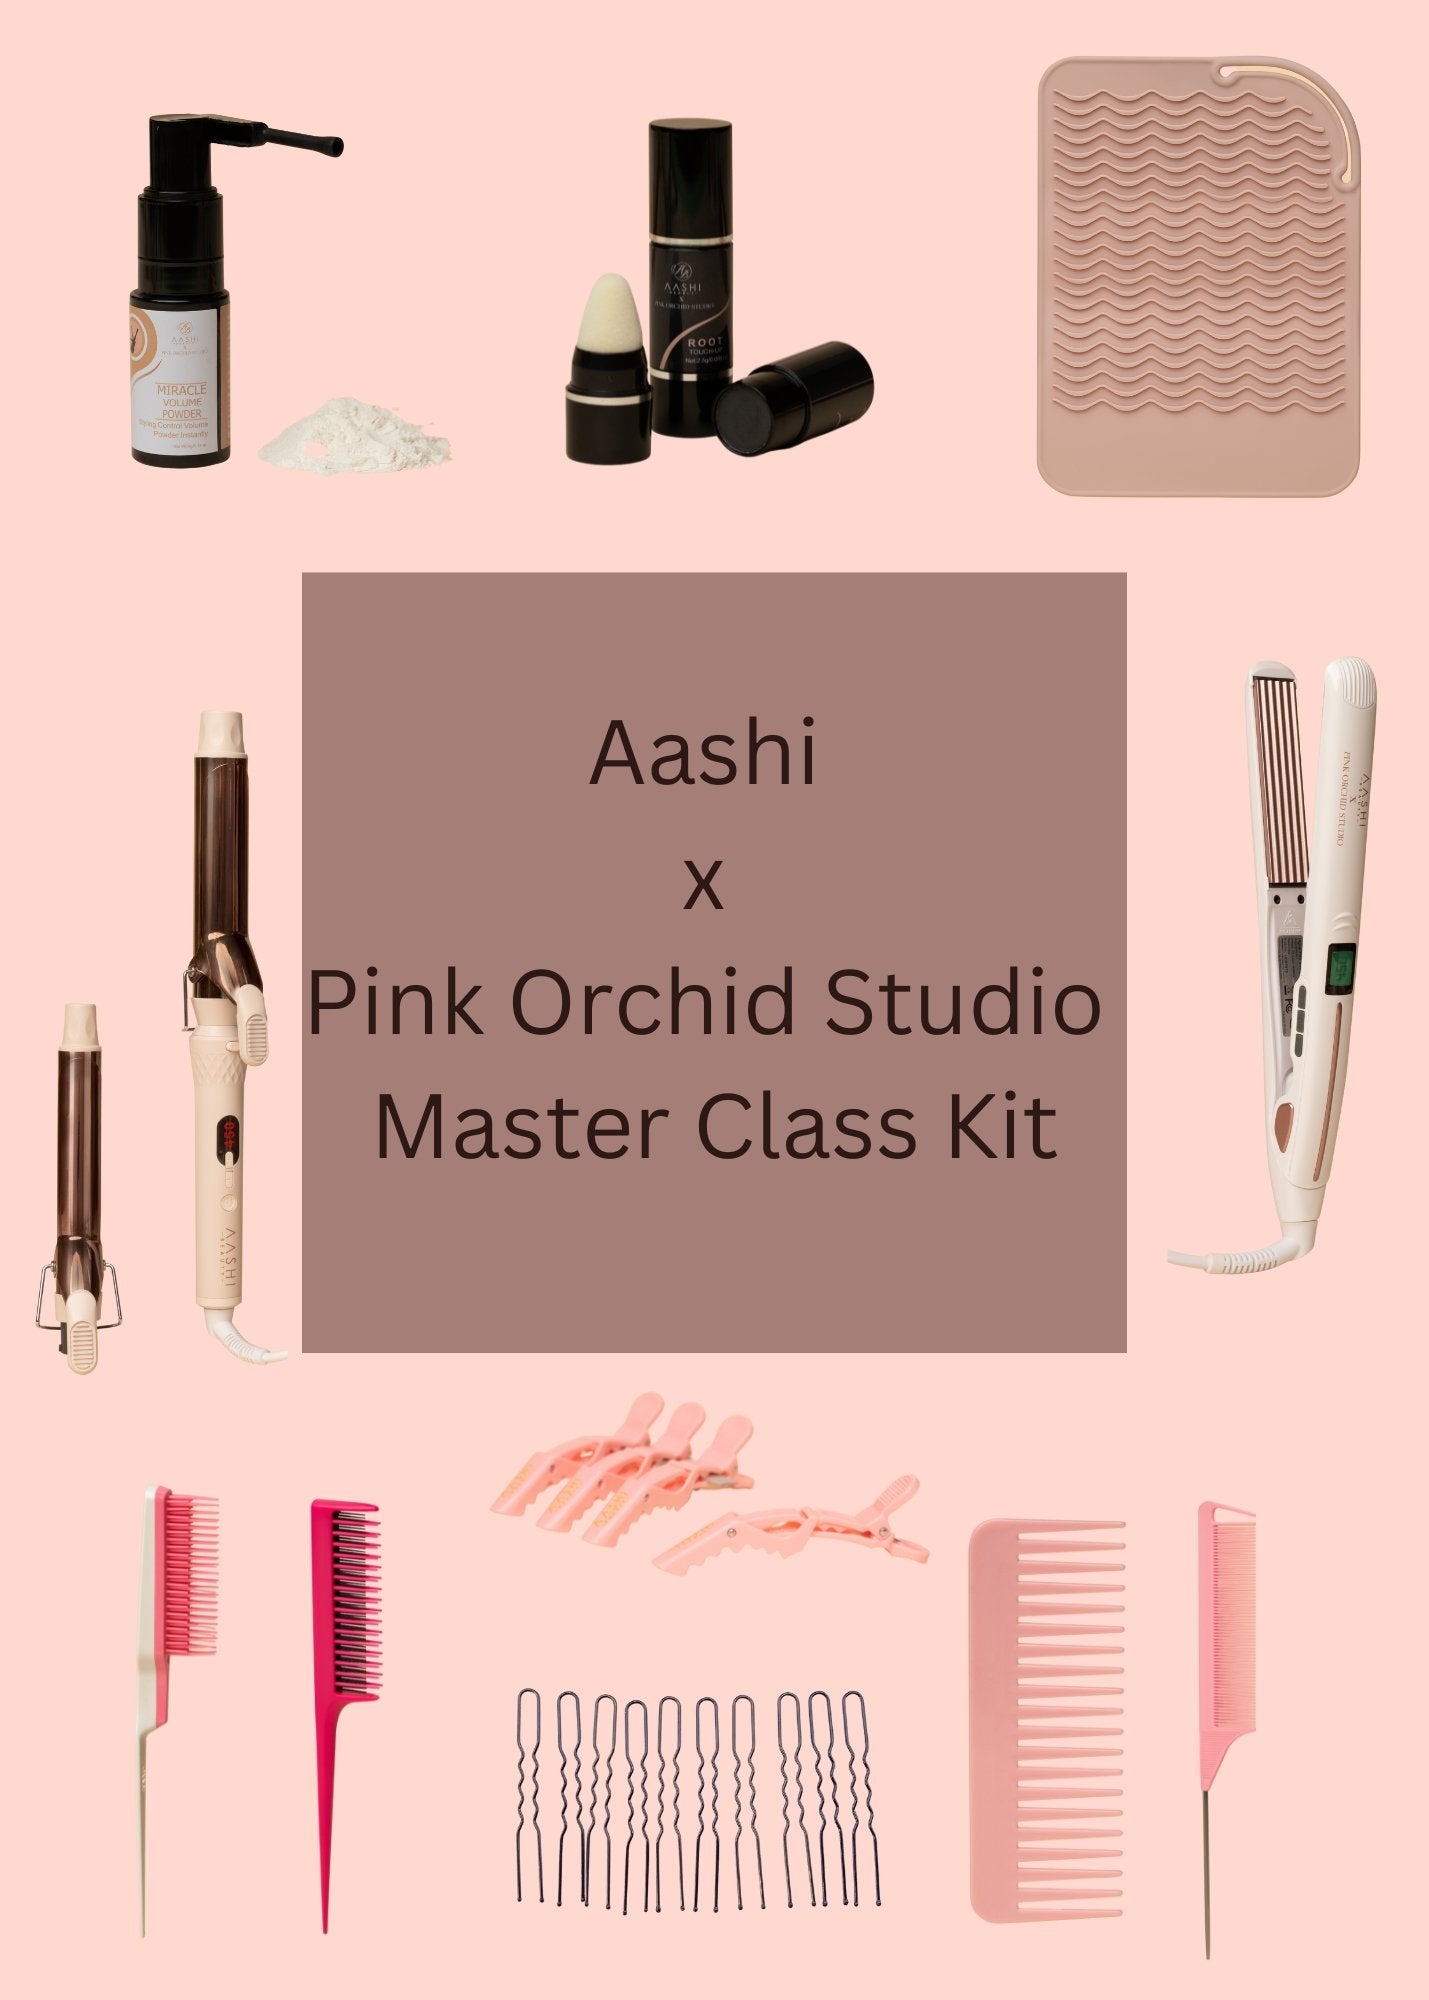 Aashi x Pink Orchid Studio Master Class Kit (With Wand Curler) - Aashi Beauty